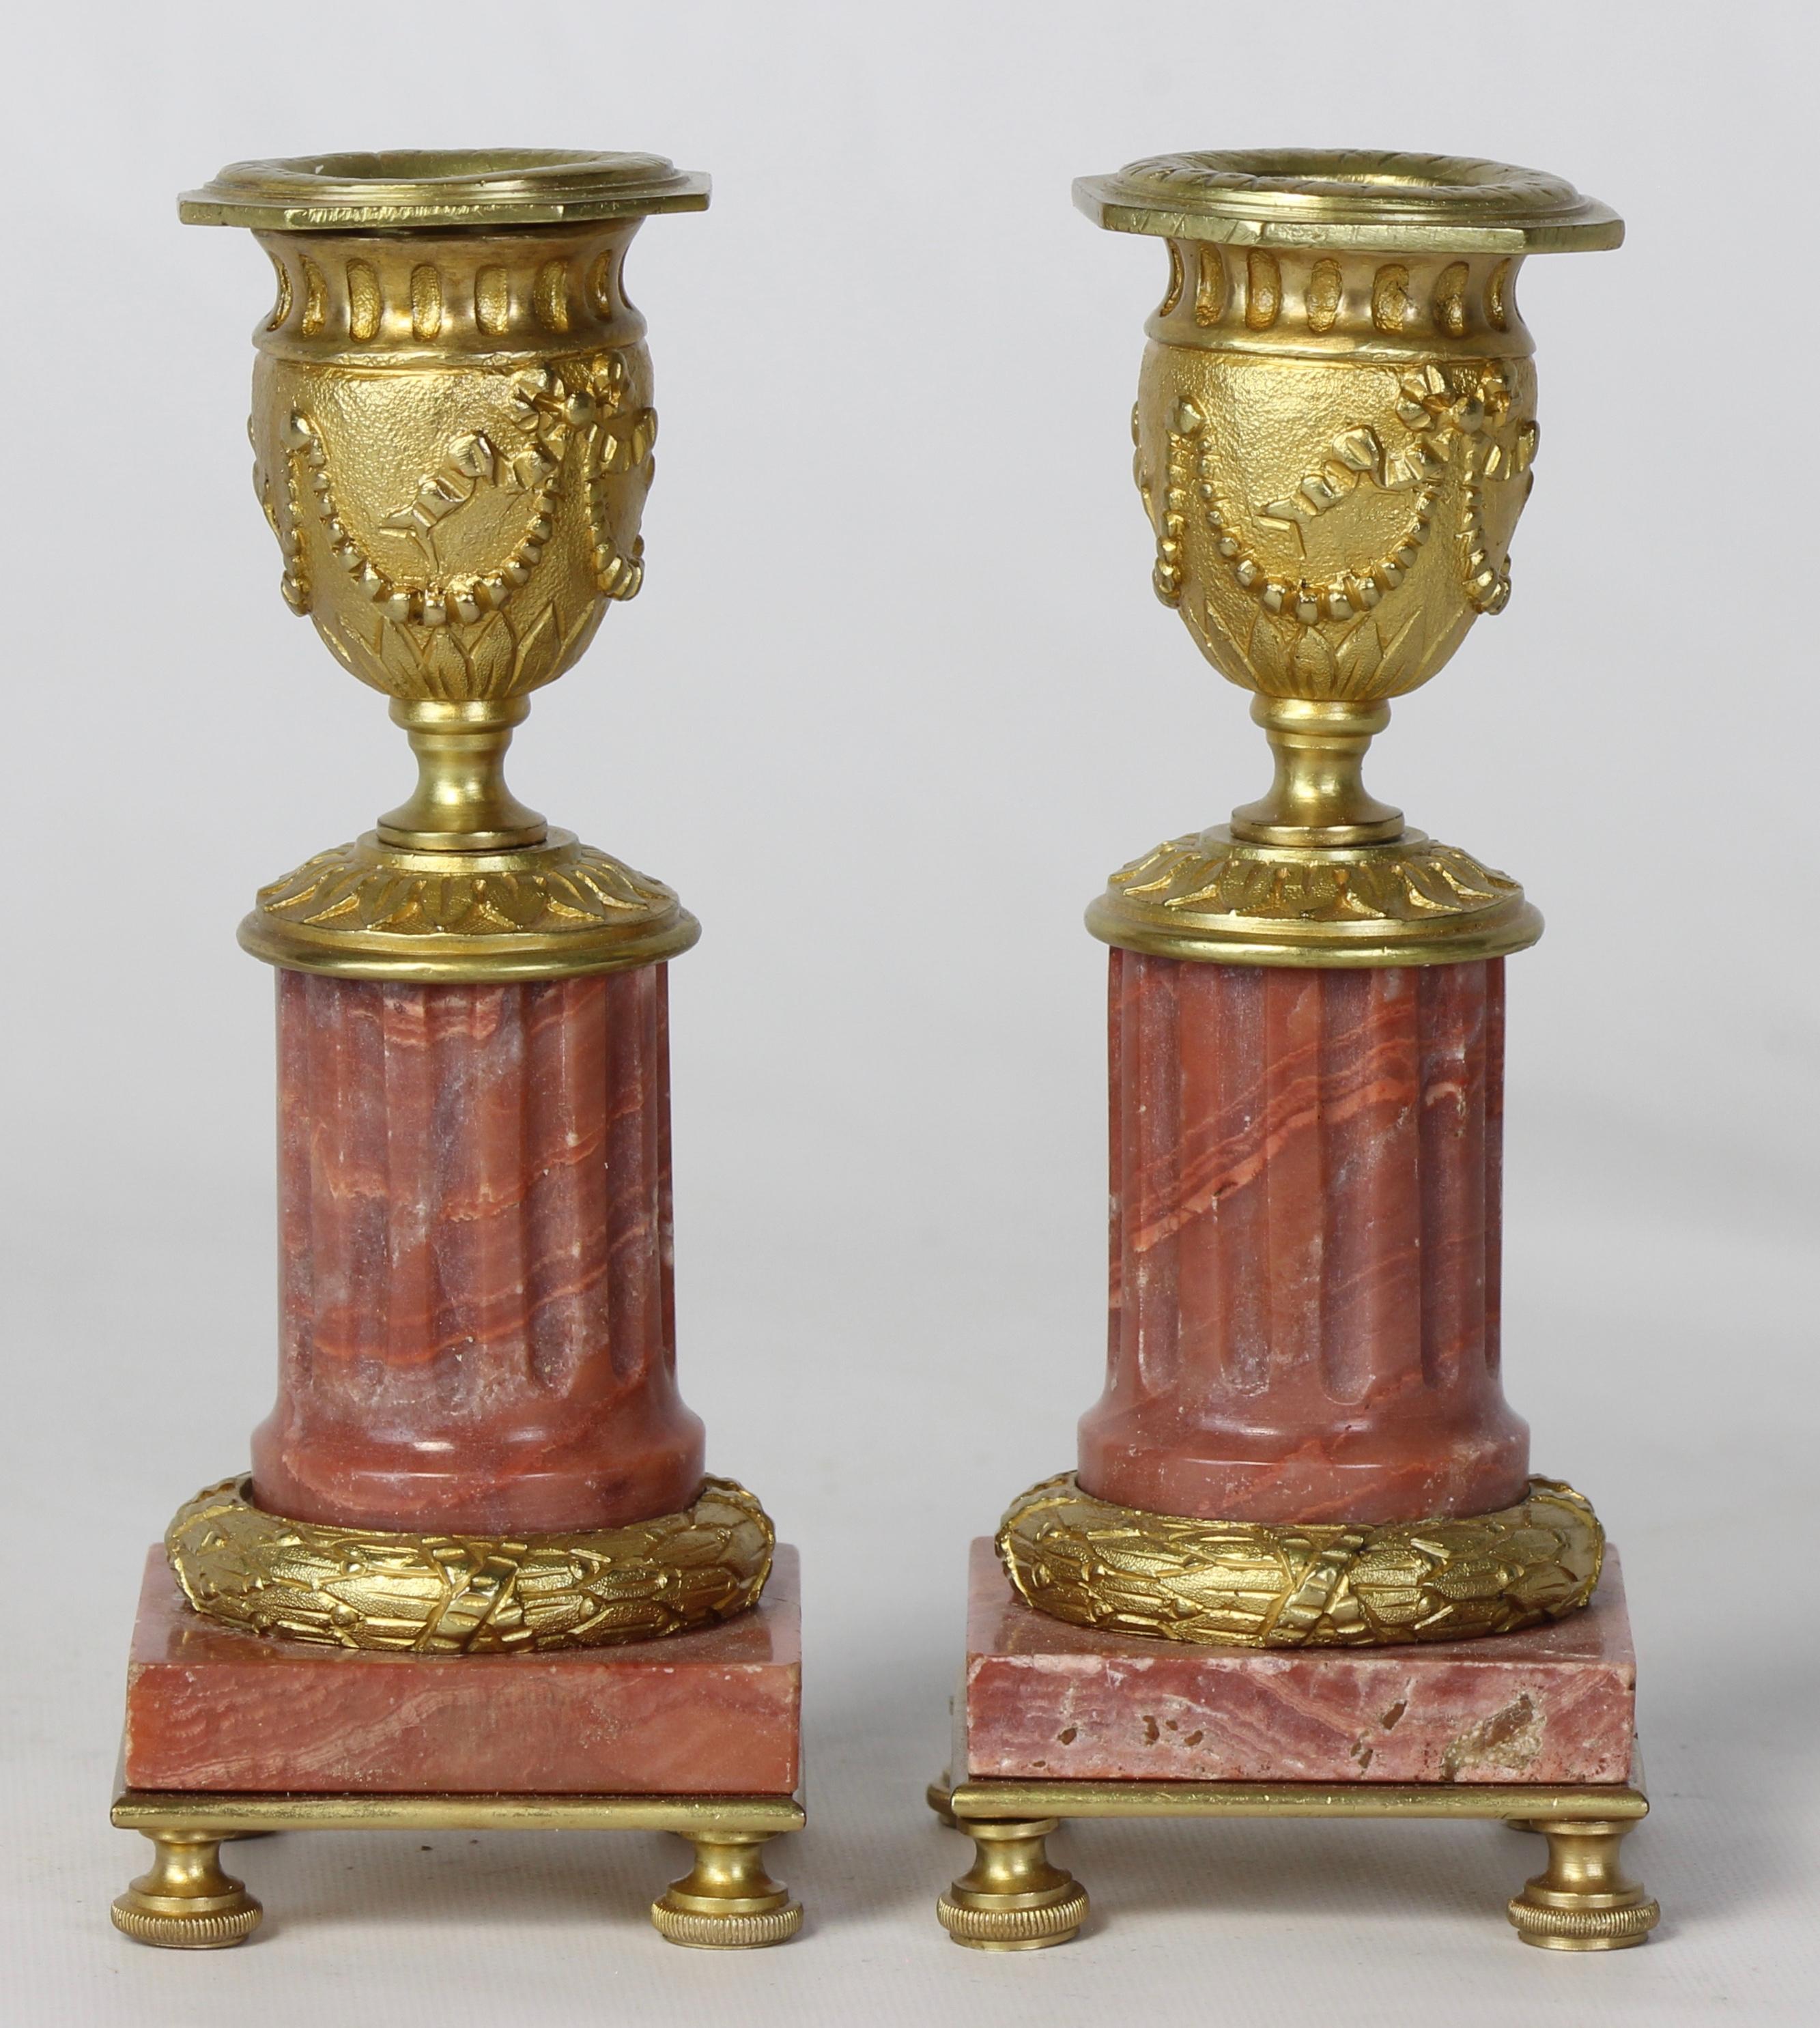 Pair of French Rose Marble Neoclassical Style Candlesticks (Französisch)